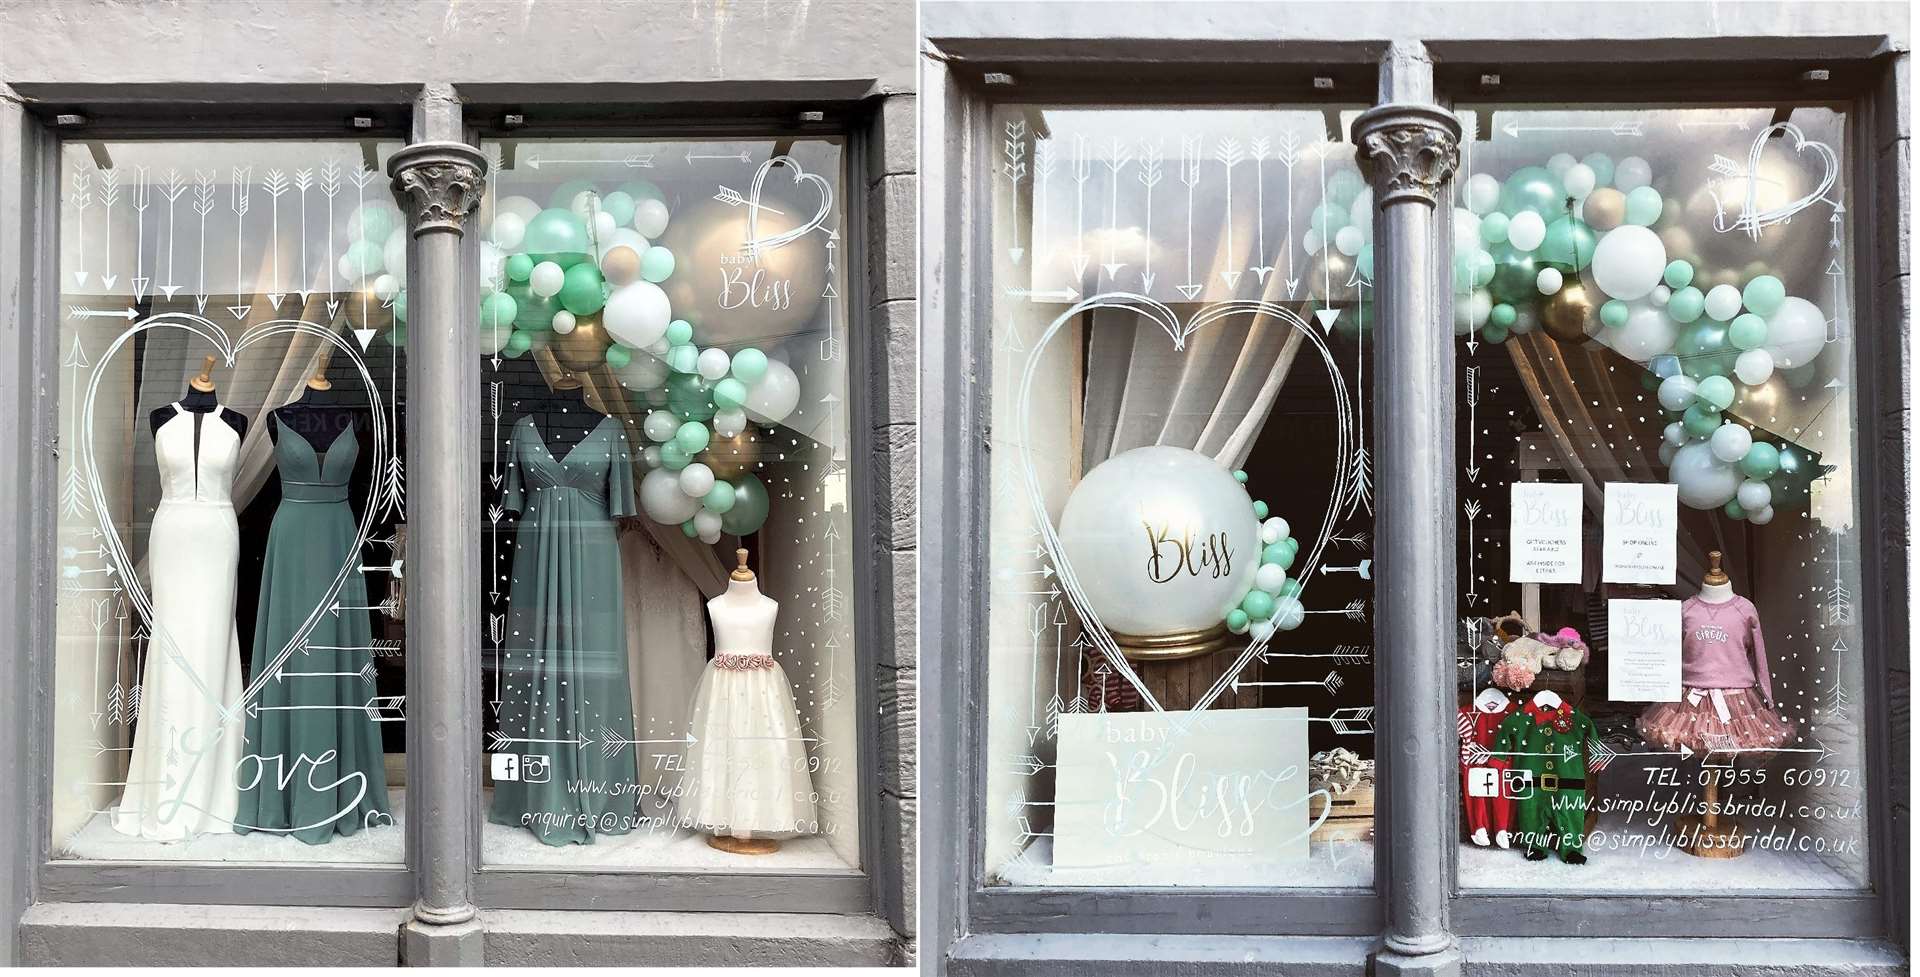 This composite image shows the Wick High Street shop as a bridal boutique one day, at left, and then as a children's clothing outlet the next day, as seen on the right.